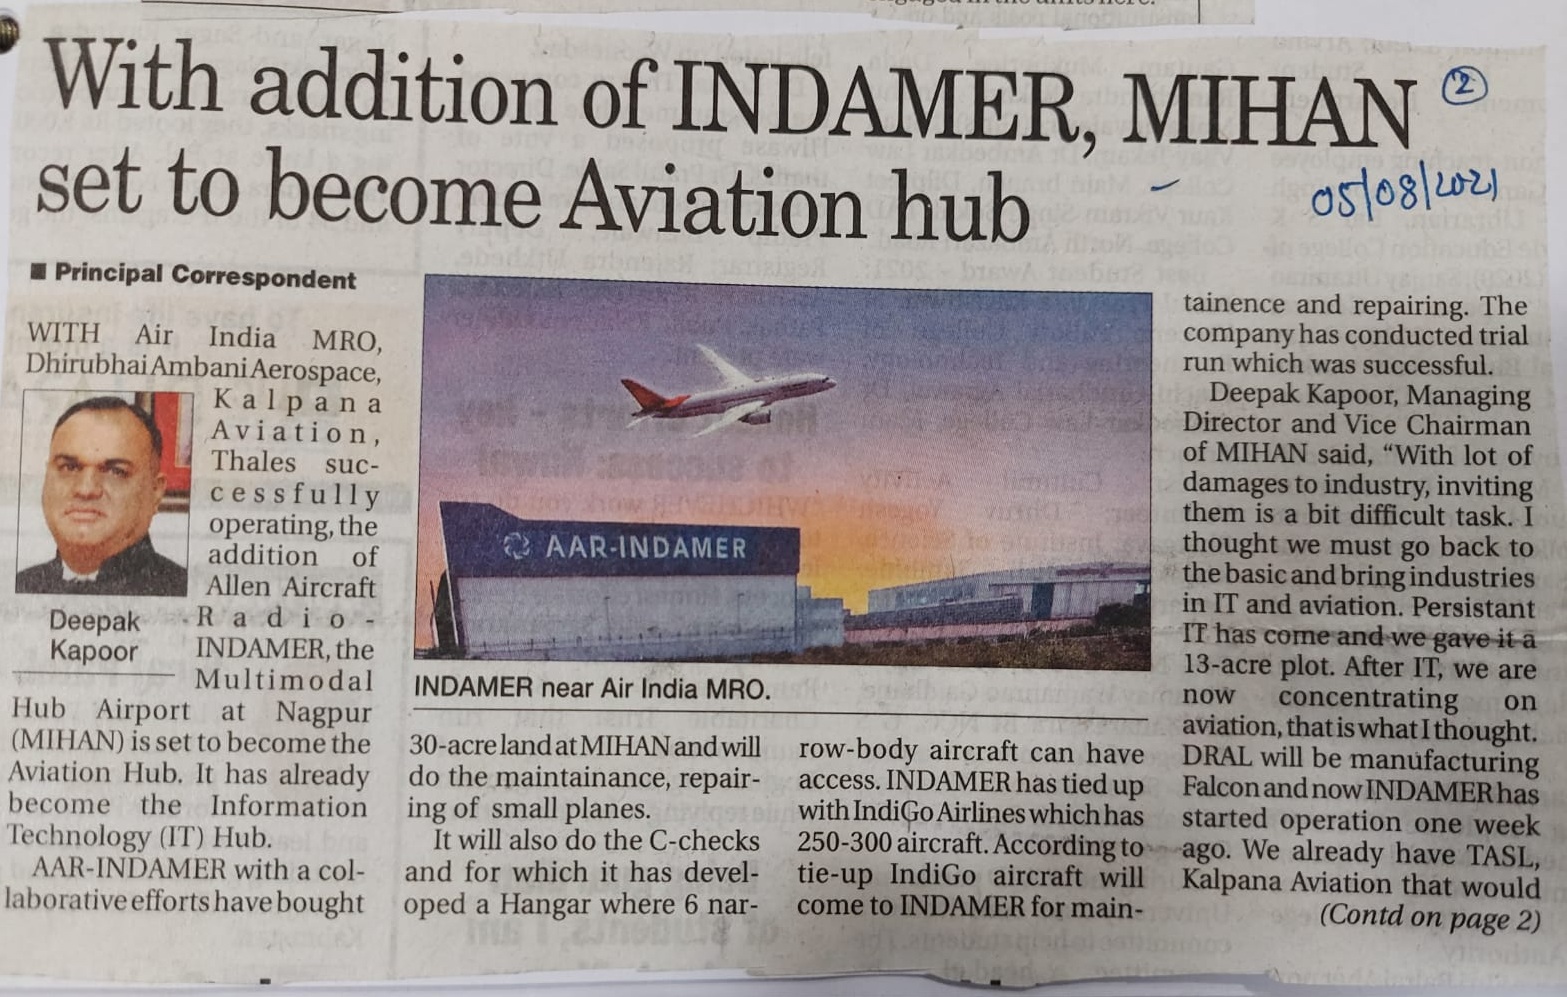 With addition of INDAMER, MIHAN set to become Aviation hub